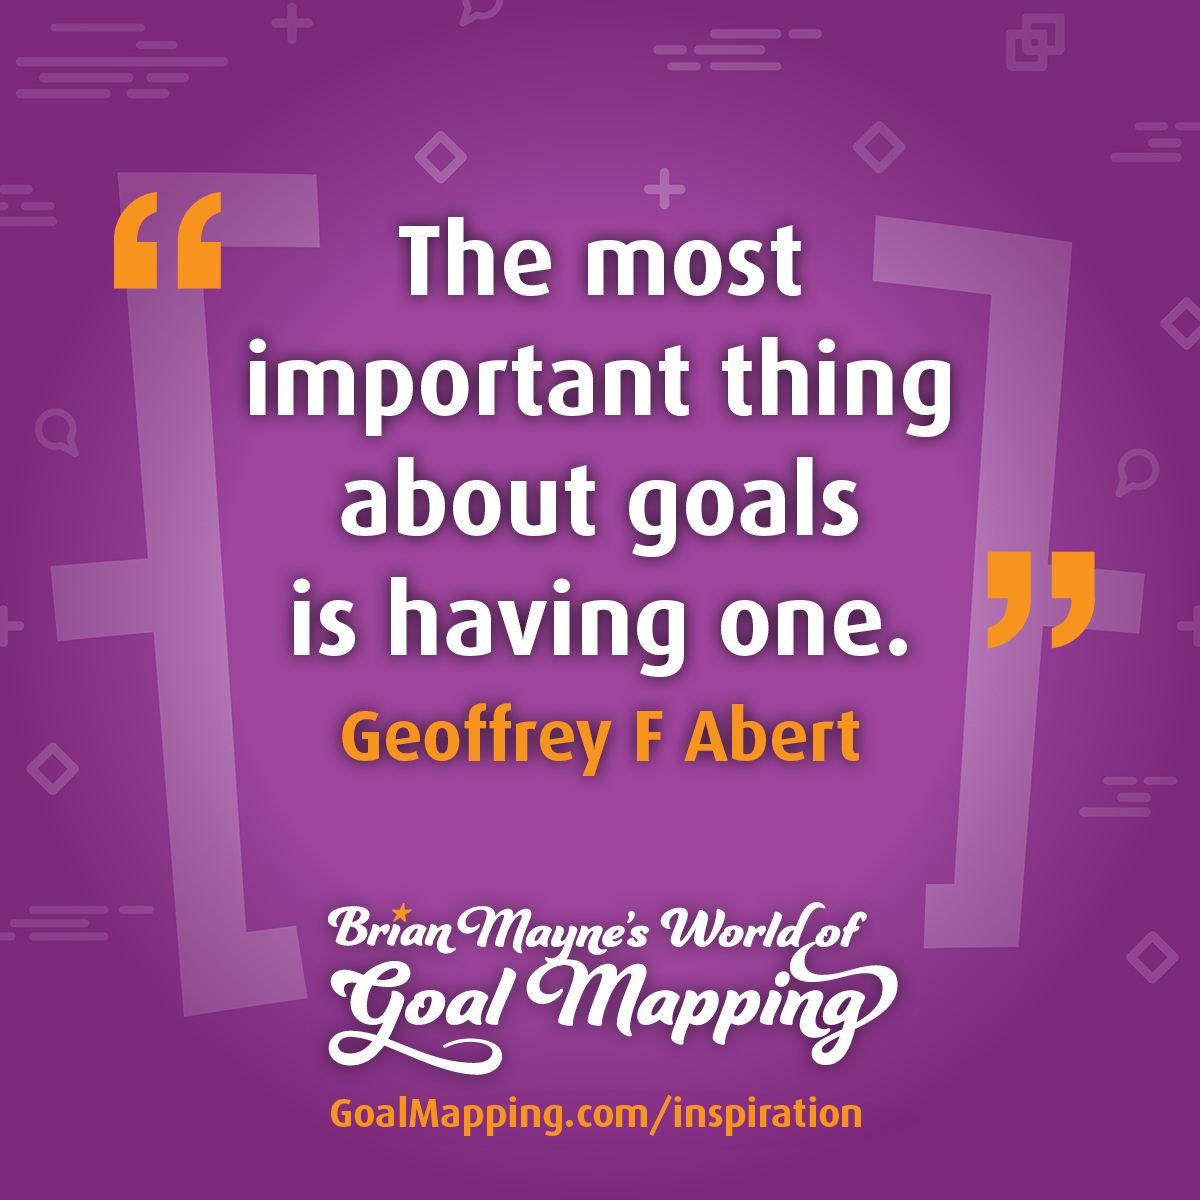 "The most important thing about goals is having one." Geoffrey F Abert